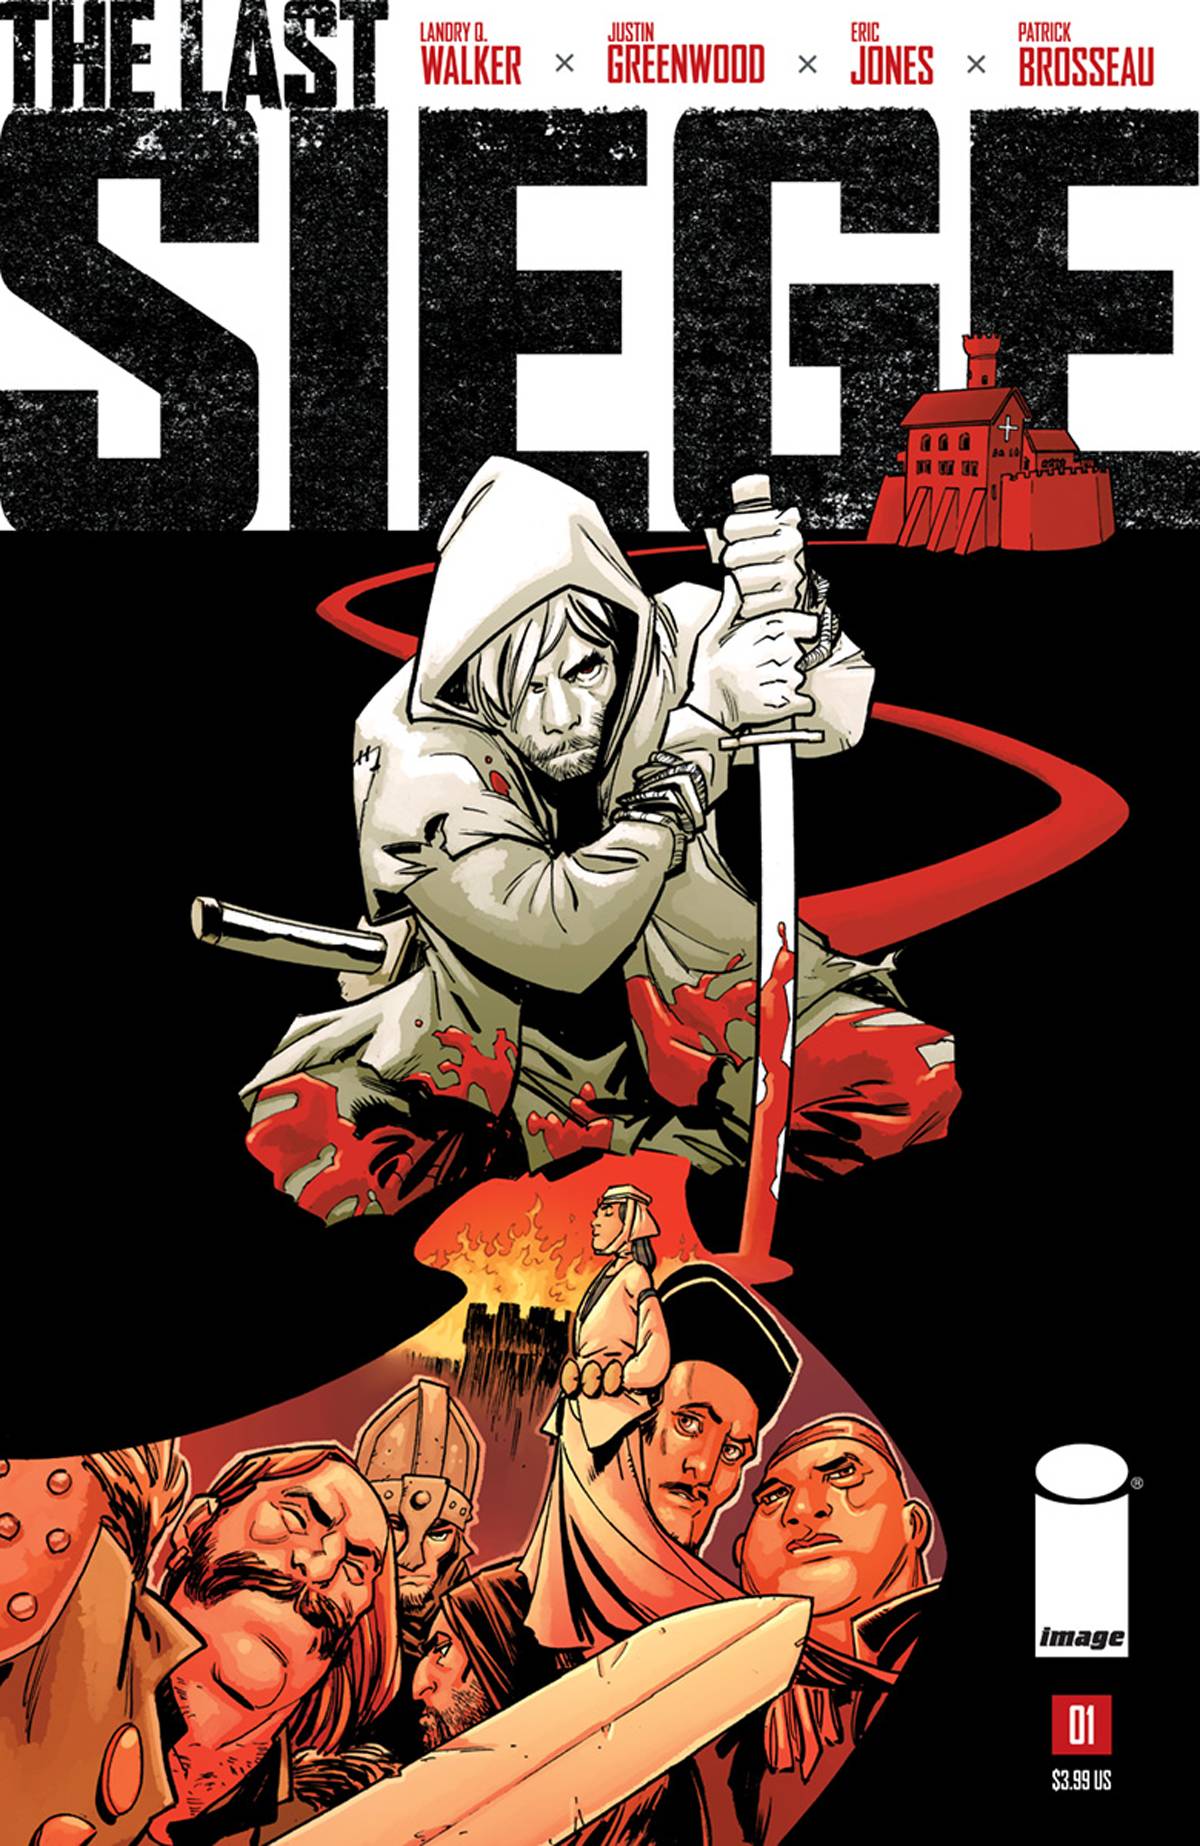 Last Siege #1 Cover A Greenwood